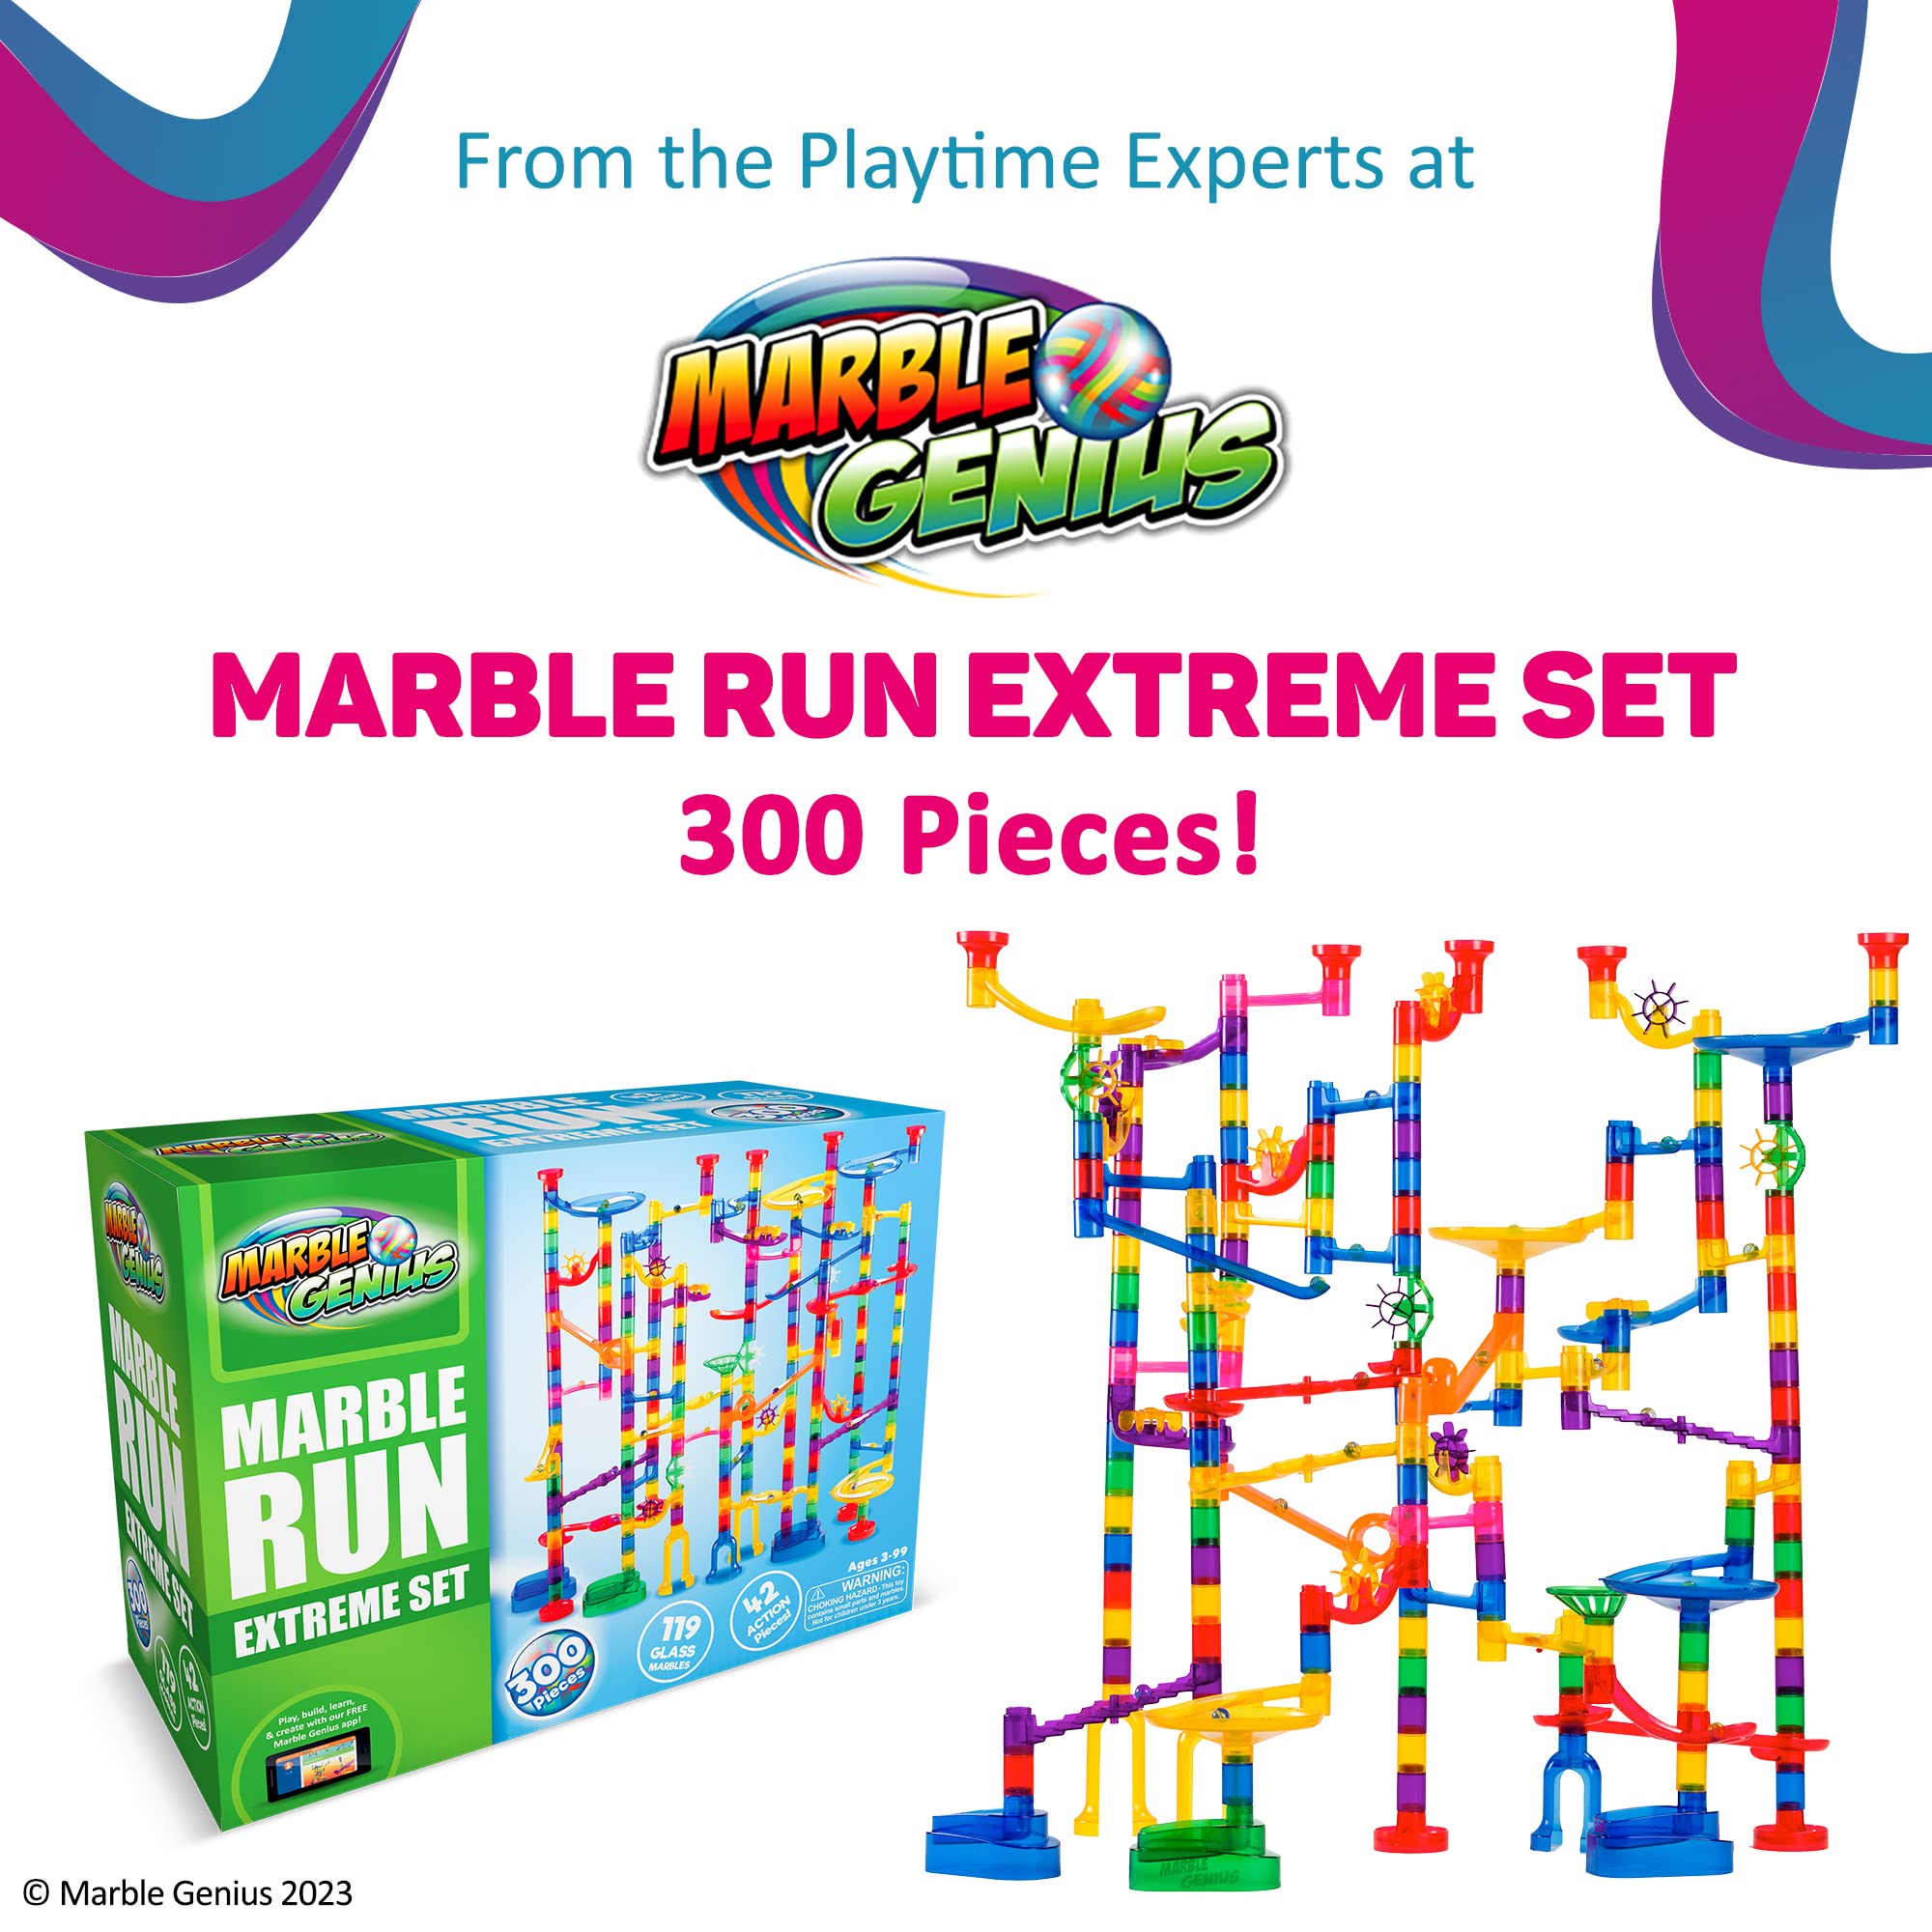 Marble Genius Marble Run (300 Complete Pieces) Maze Track or Race Game for Adults, Teens, Toddlers, or Kids Aged 4-8 Years Old, (118 Translucent Marbulous Pieces + 119 Glass-Marble Set), Extreme Set